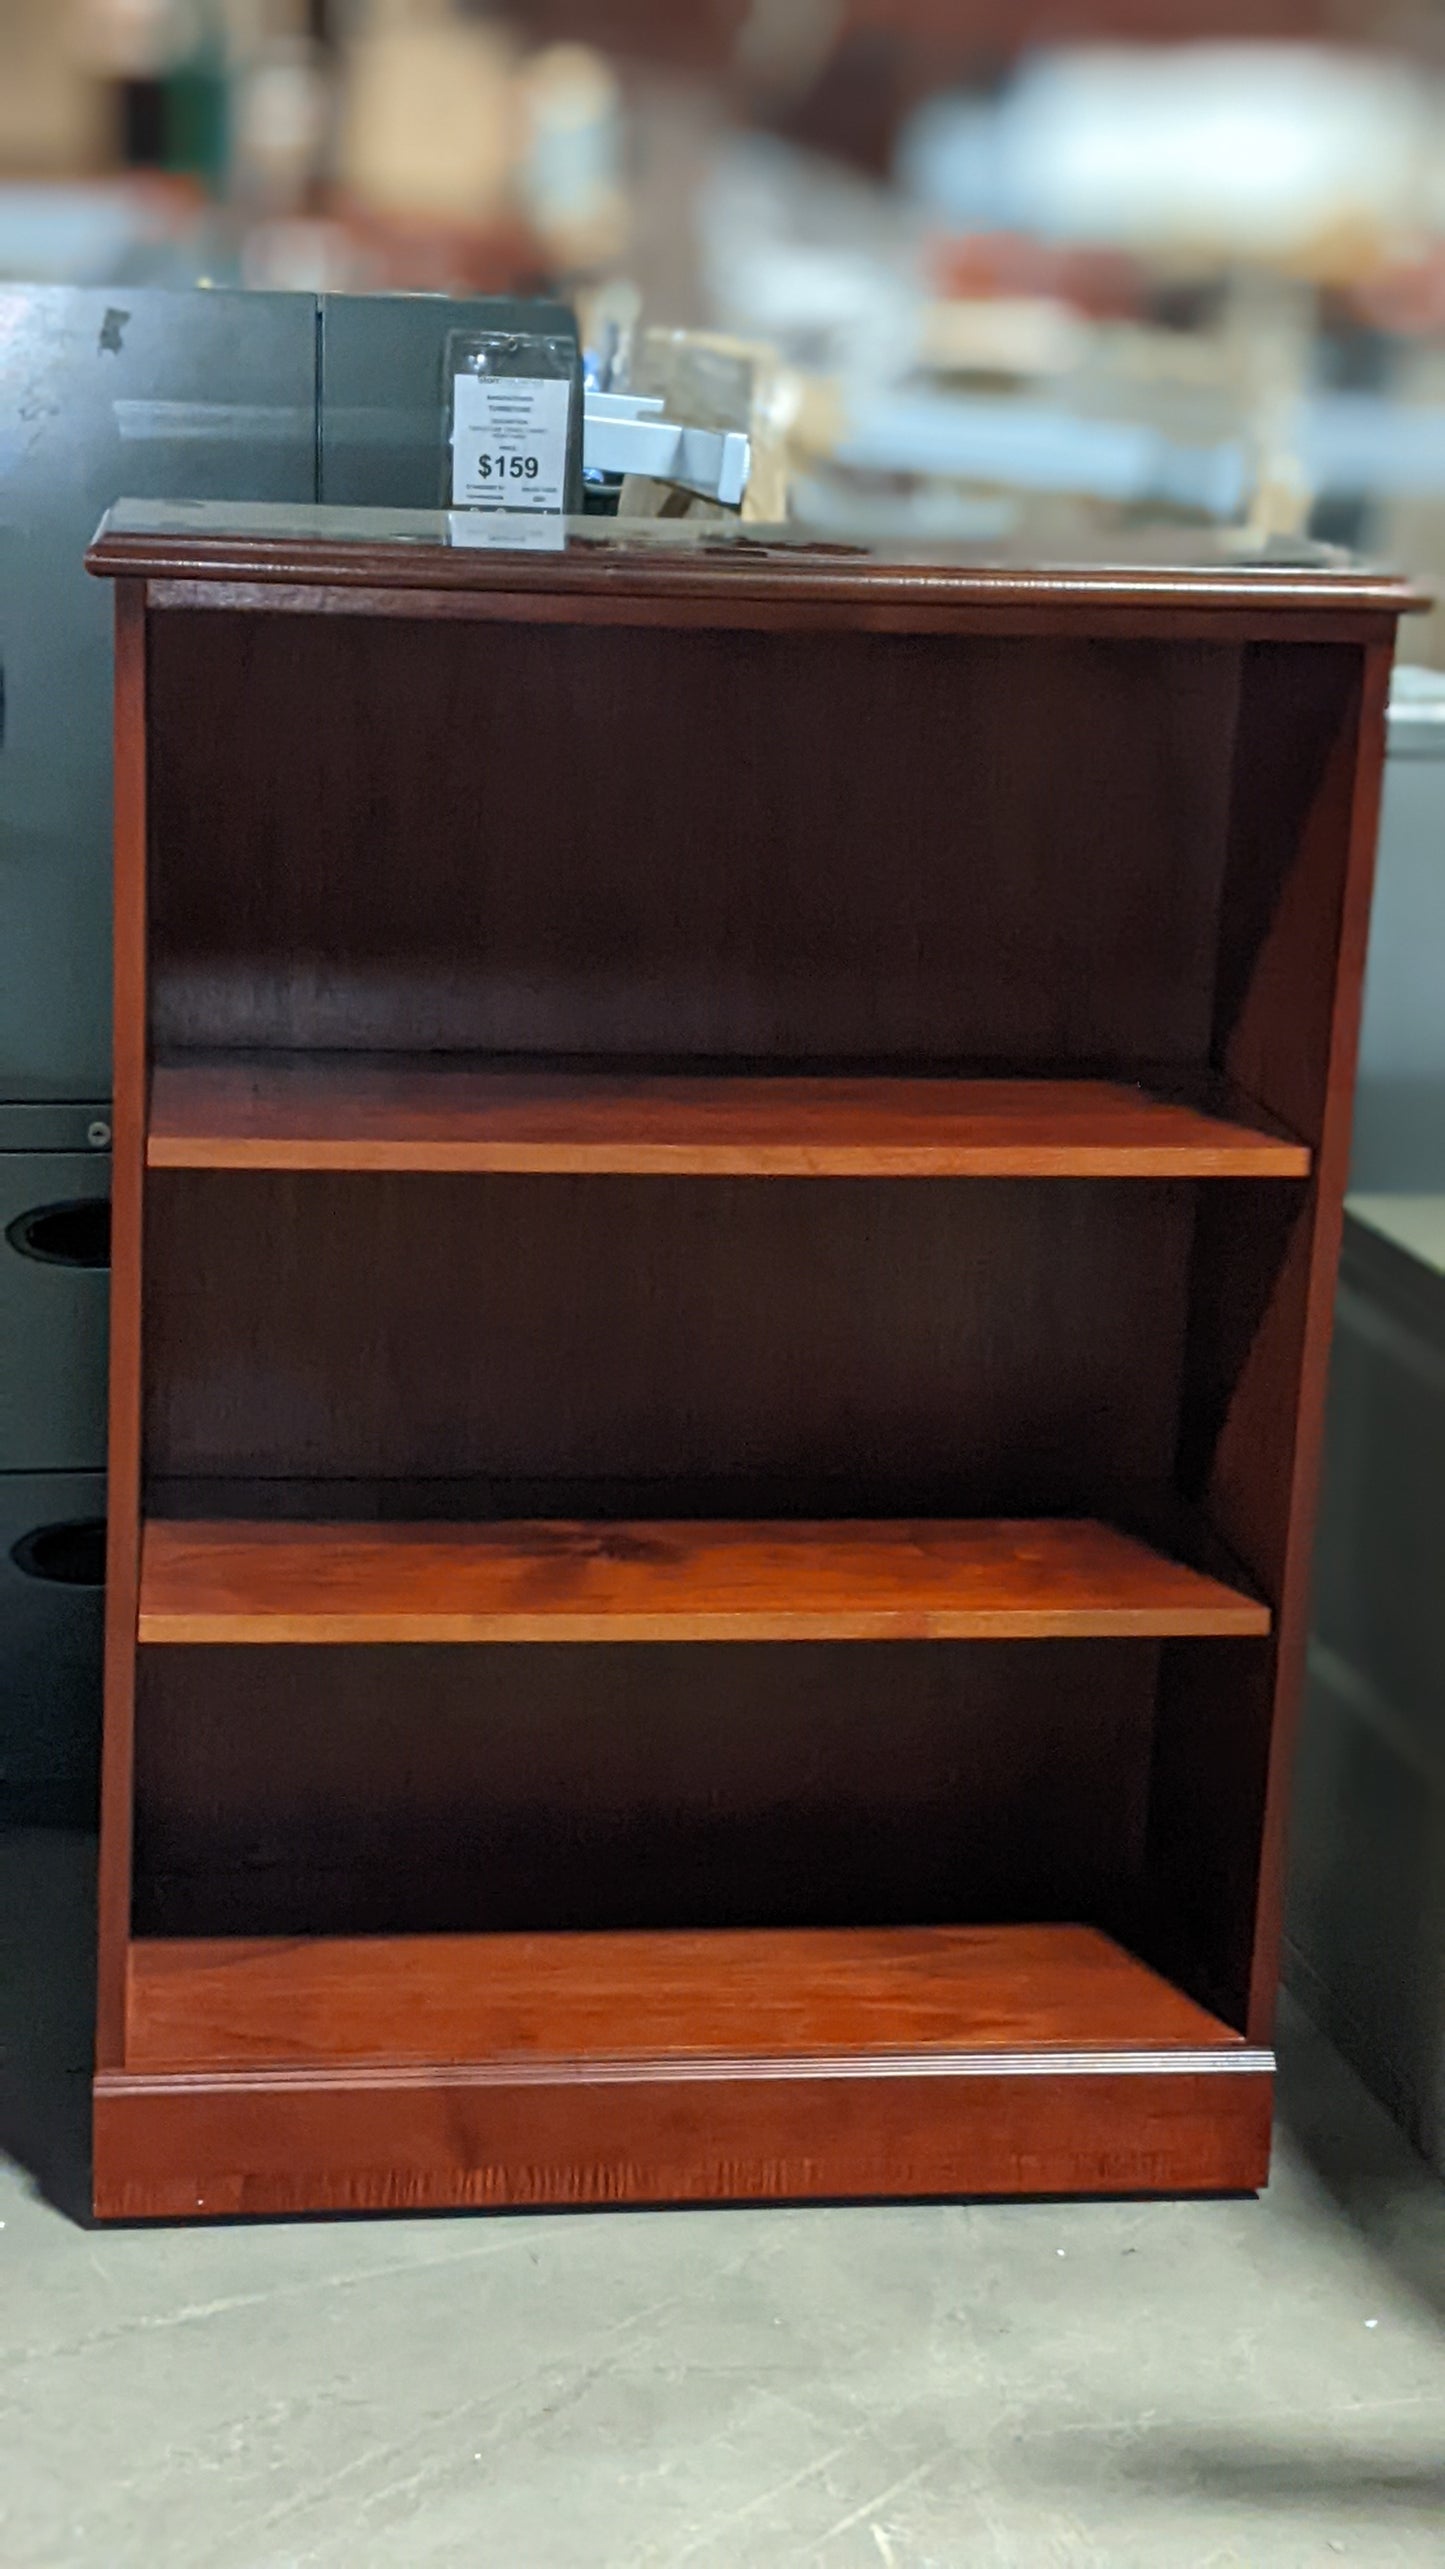 PREOWNED | 3-HIGH BOOKCASE